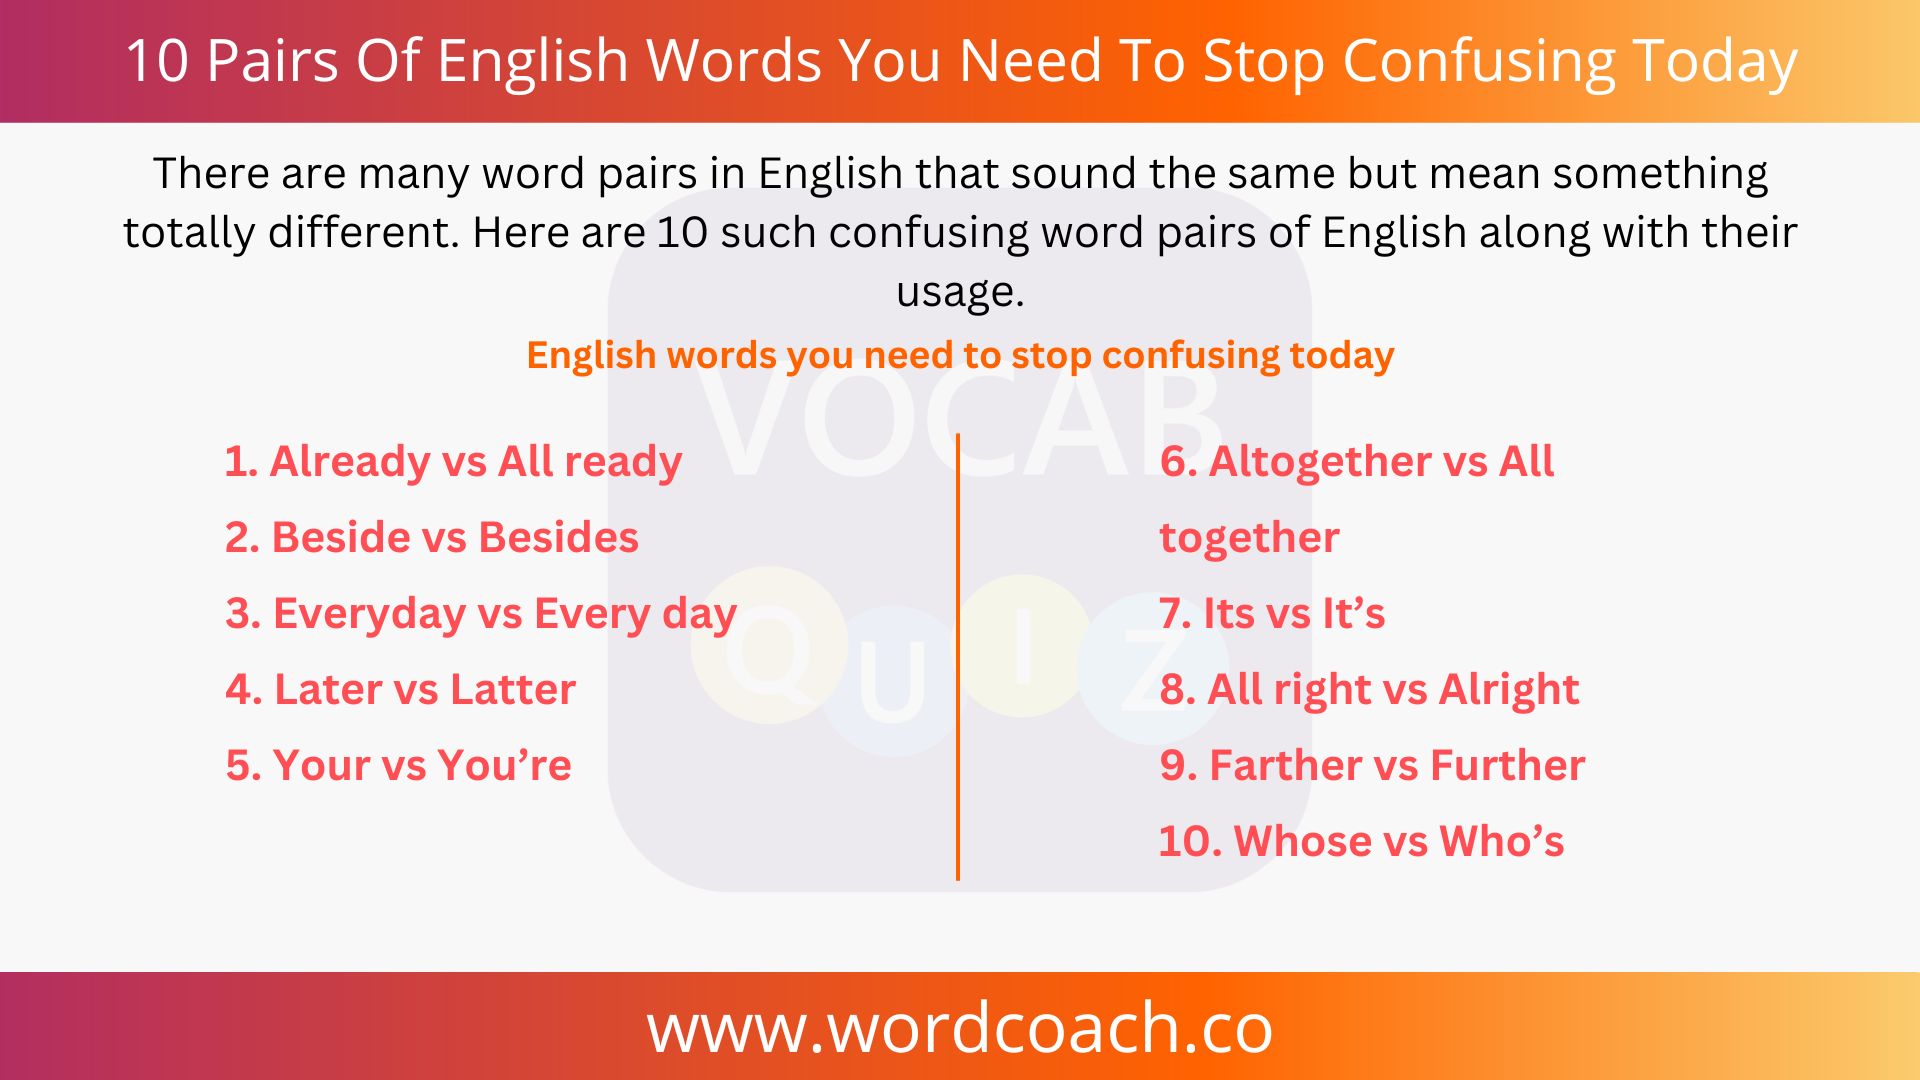 10 Pairs Of English Words You Need To Stop Confusing Today - wordcoach.co